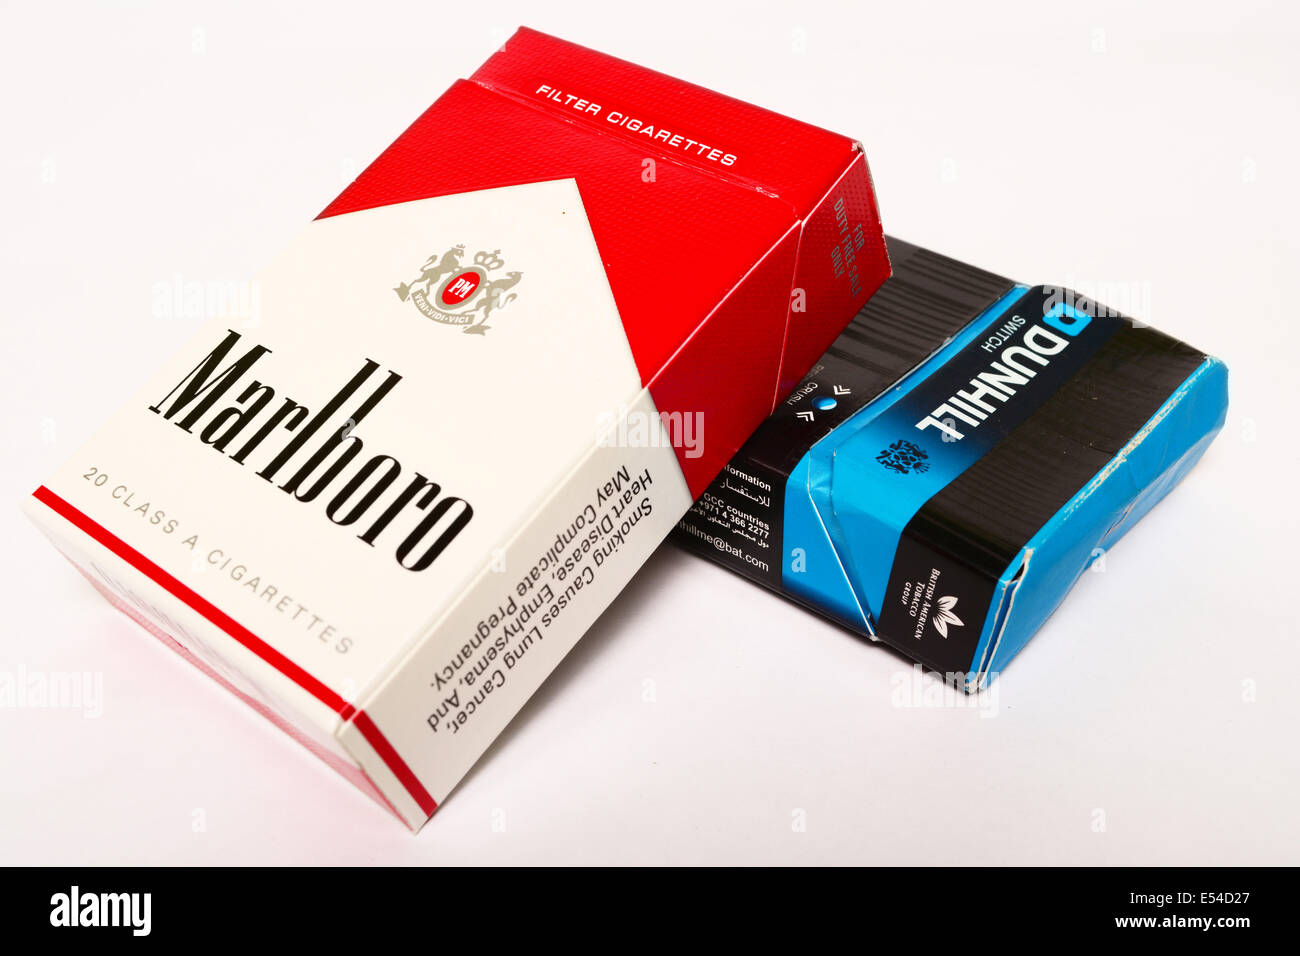 Packets of Marlboro and Dunhill Cigarettes Stock Photo